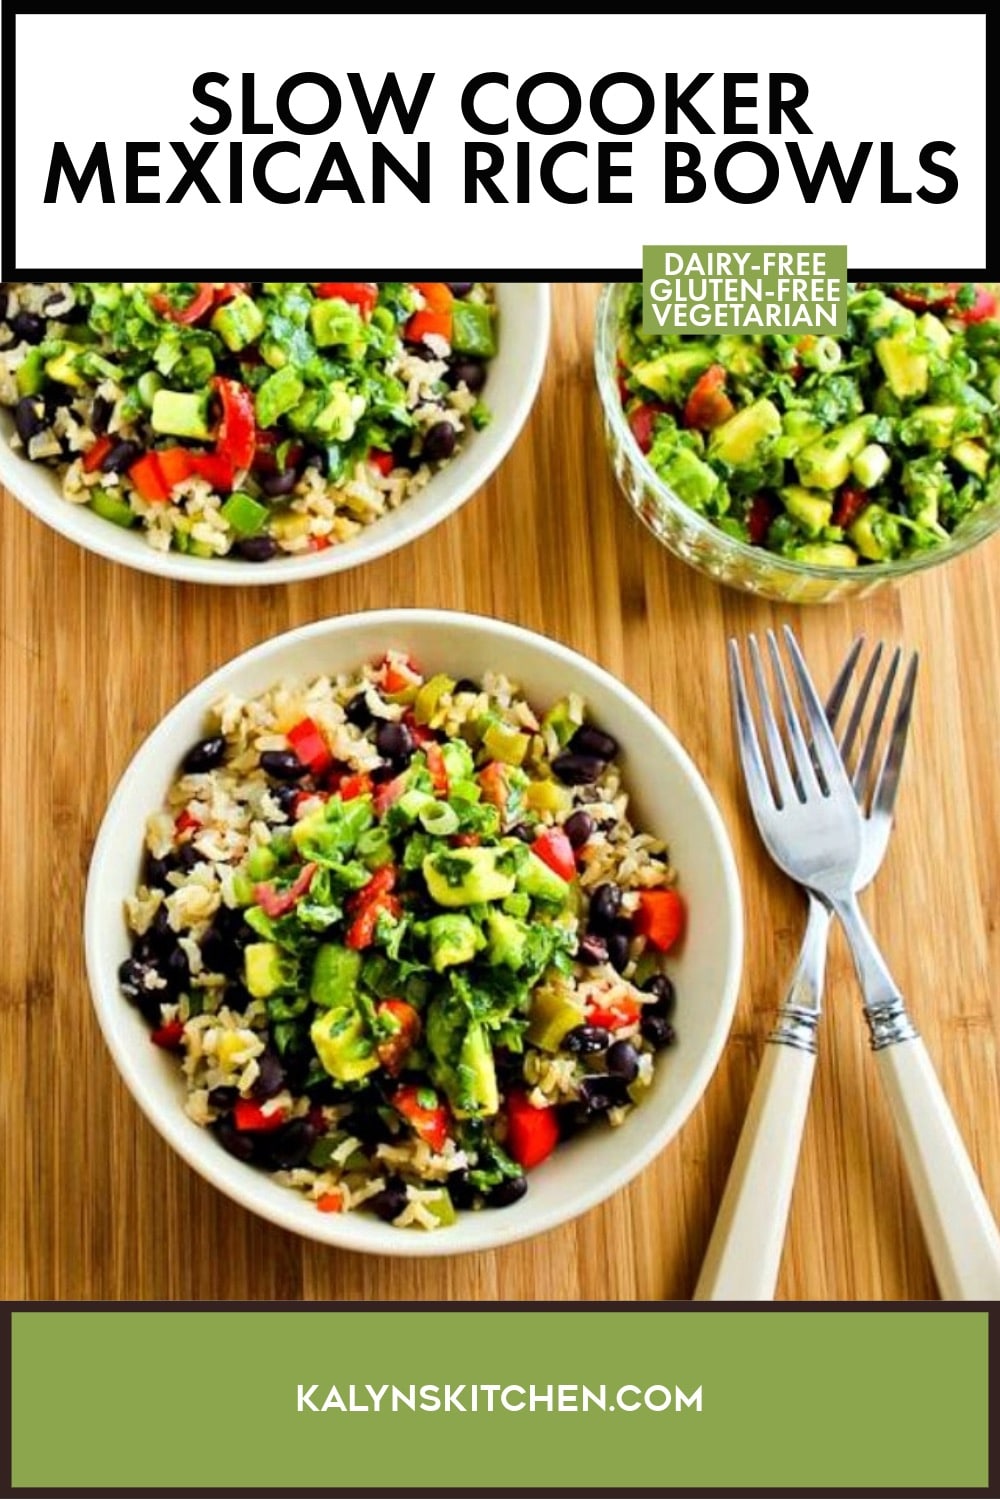 Pinterest image of Slow Cooker Mexican Rice Bowls